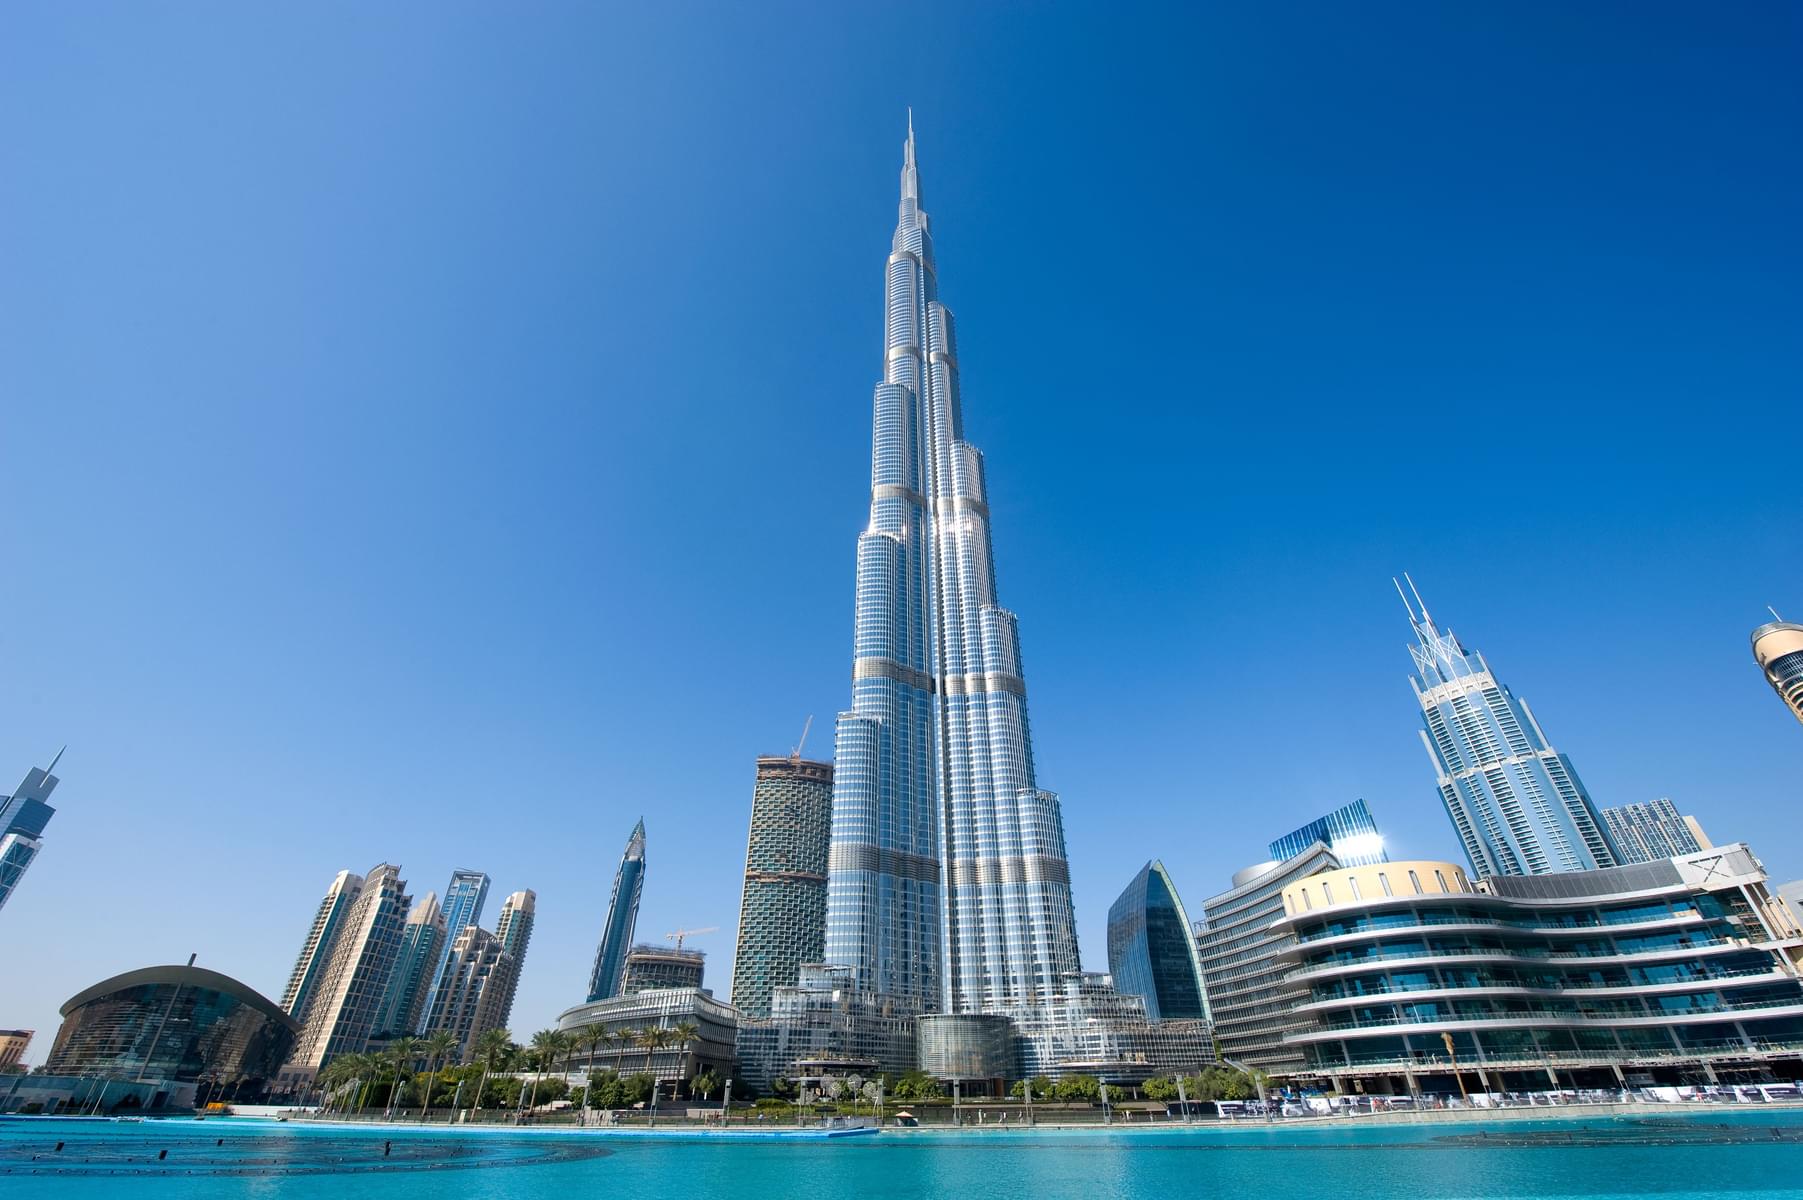 Tallest Freestanding Structure in The World